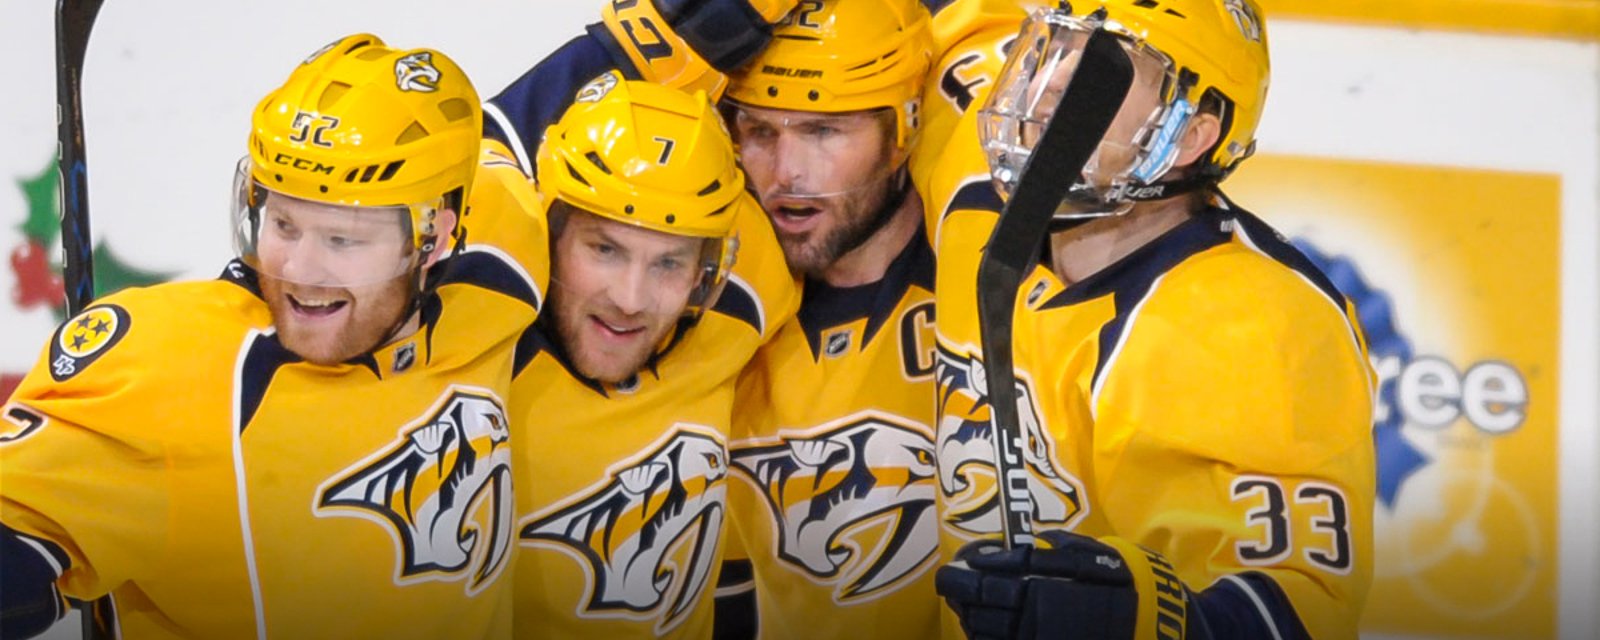 Breaking: Preds announce two surprising AHL demotions